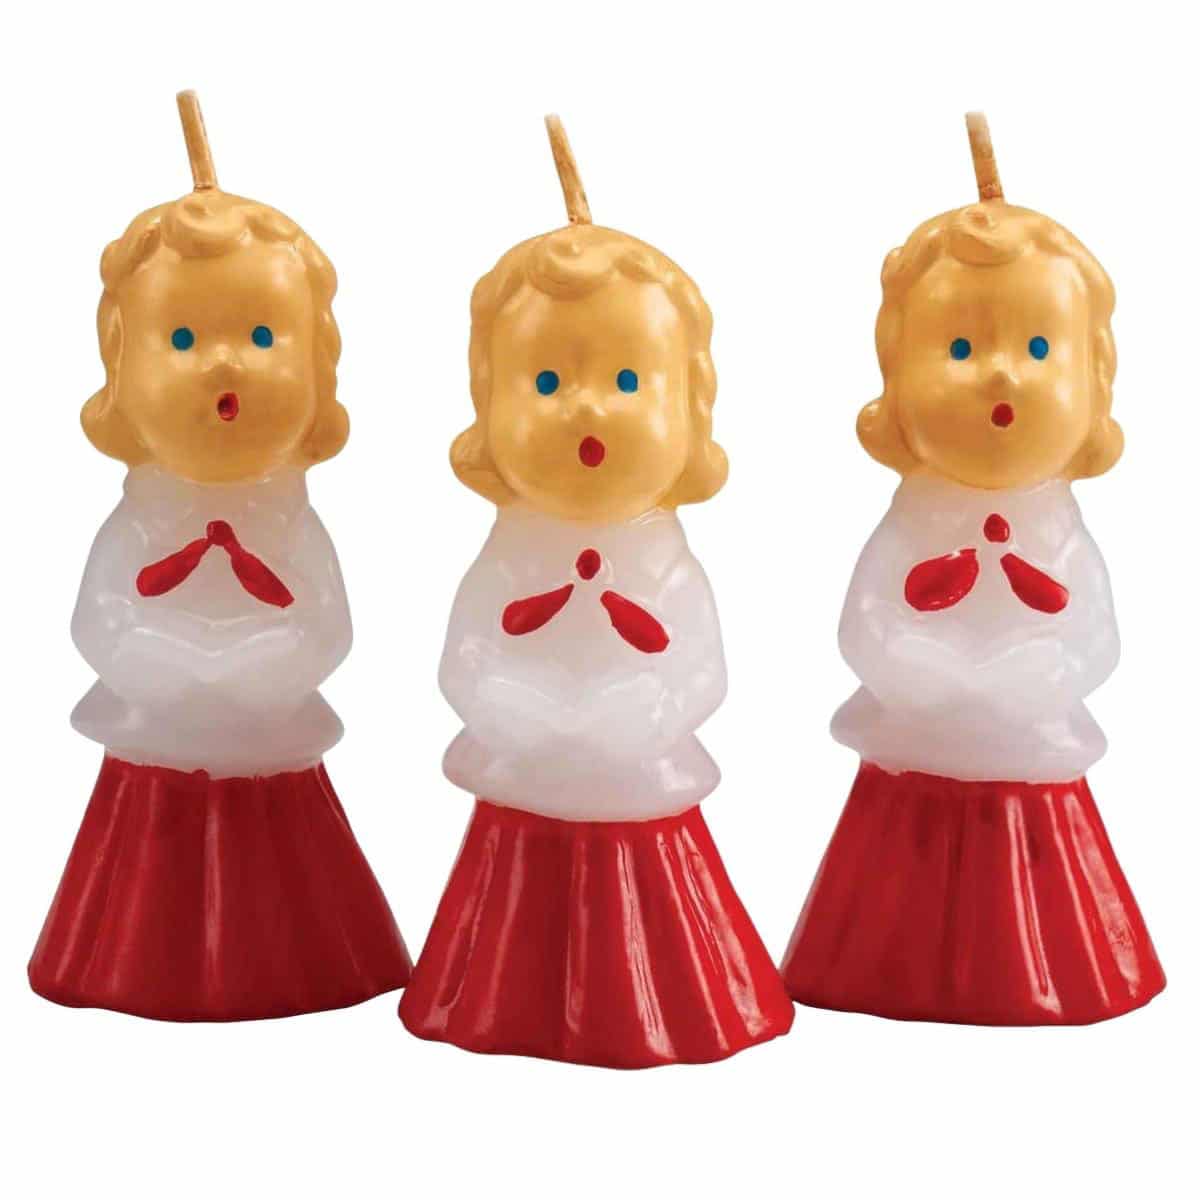 Reproduction Gurley caroler candles.